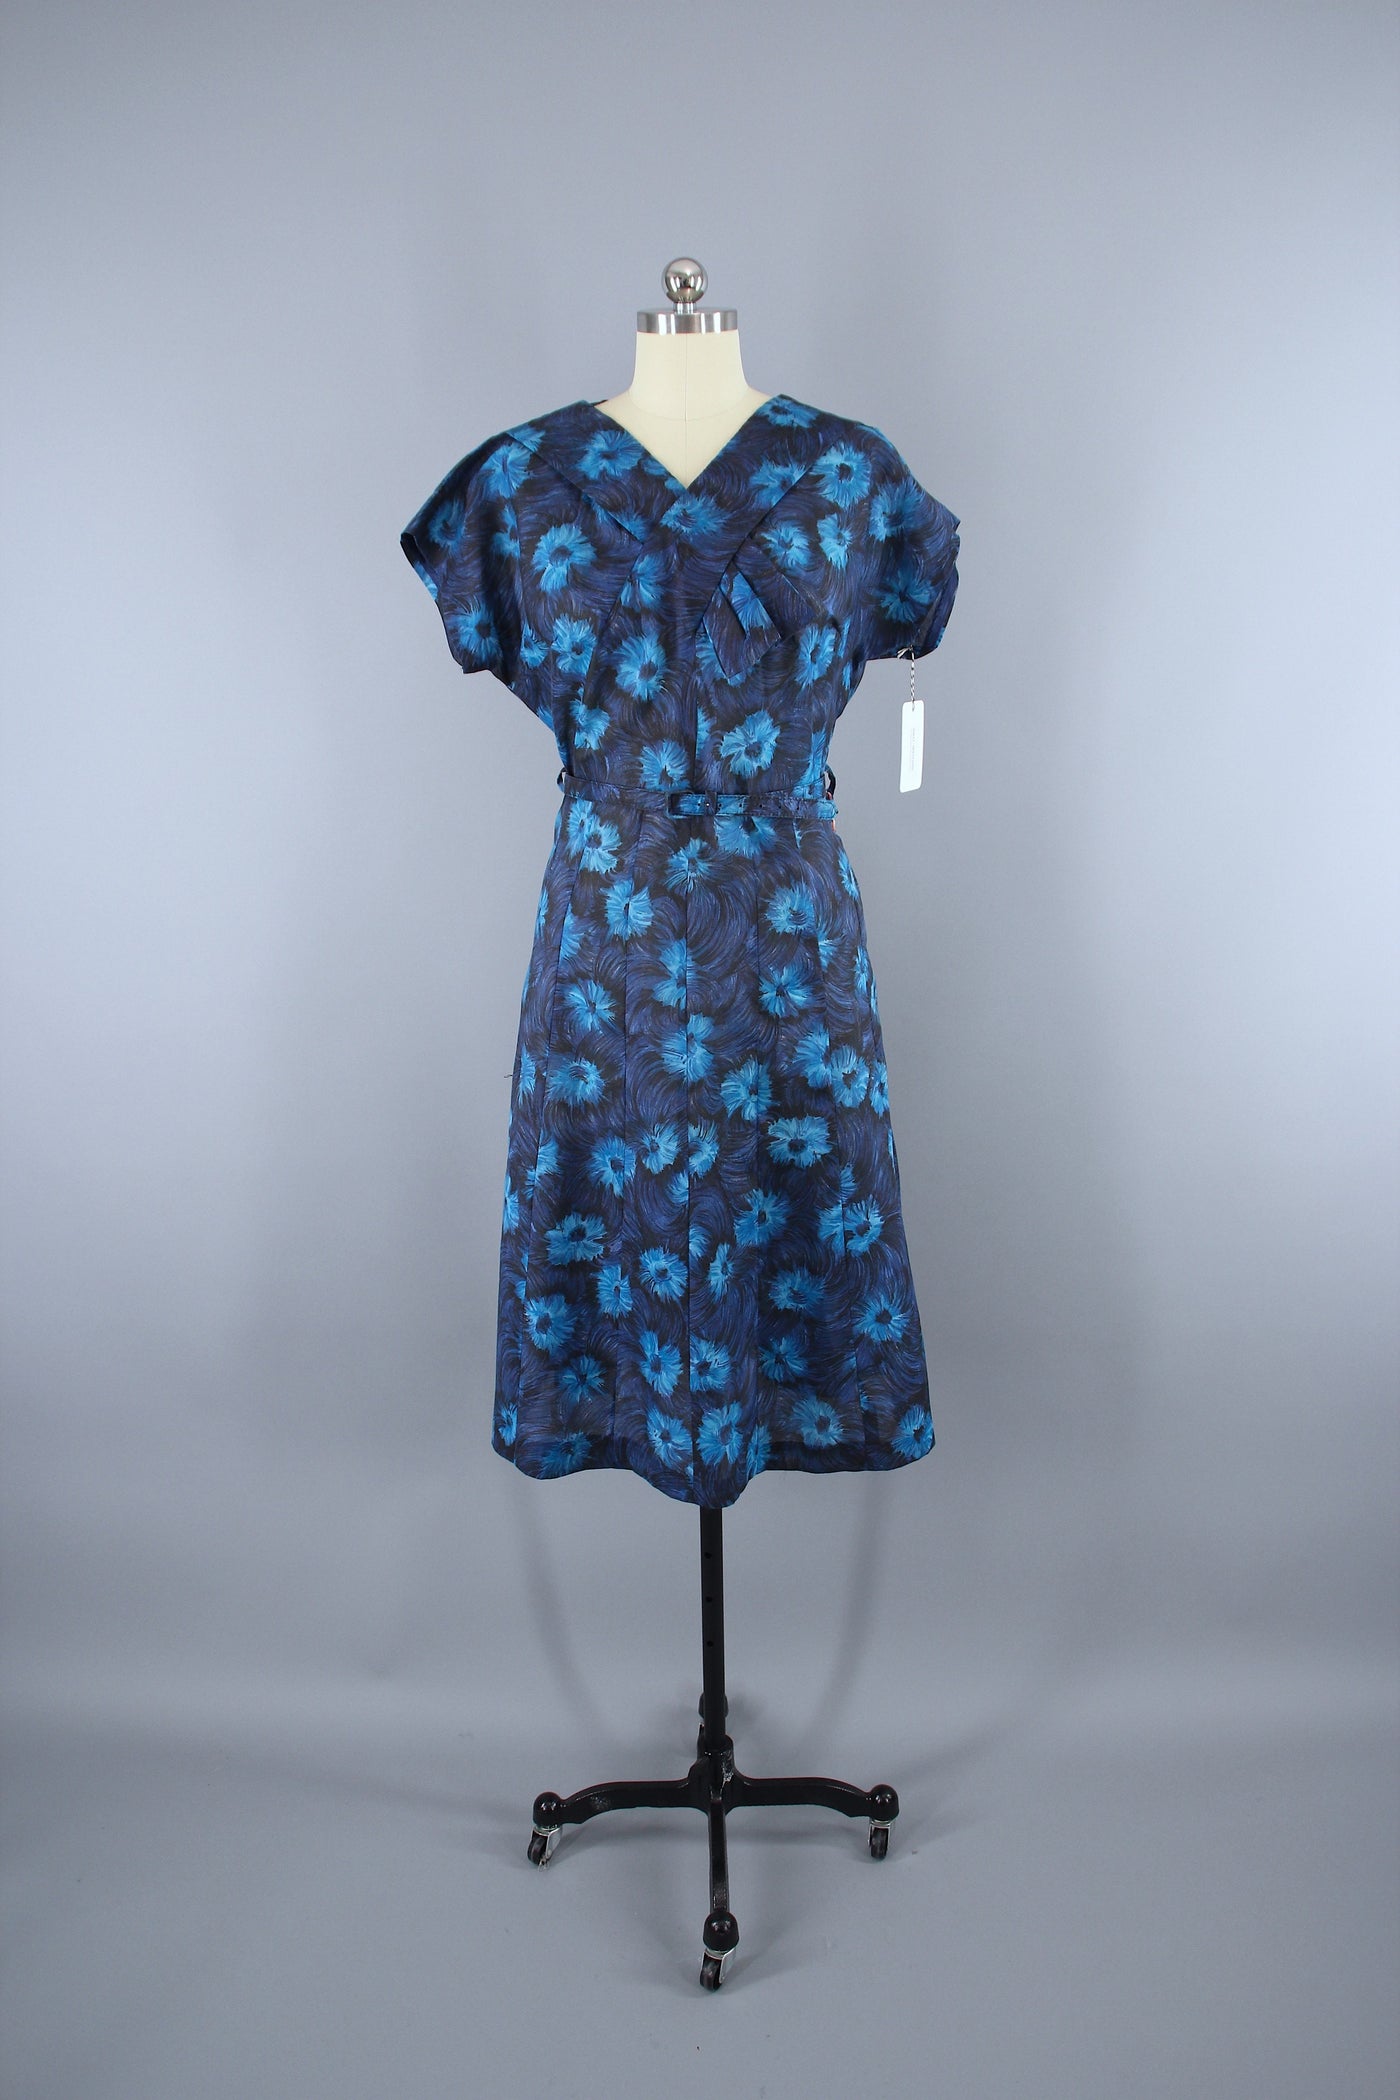 Vintage 1950s Blue Floral Print Day Dress - ThisBlueBird